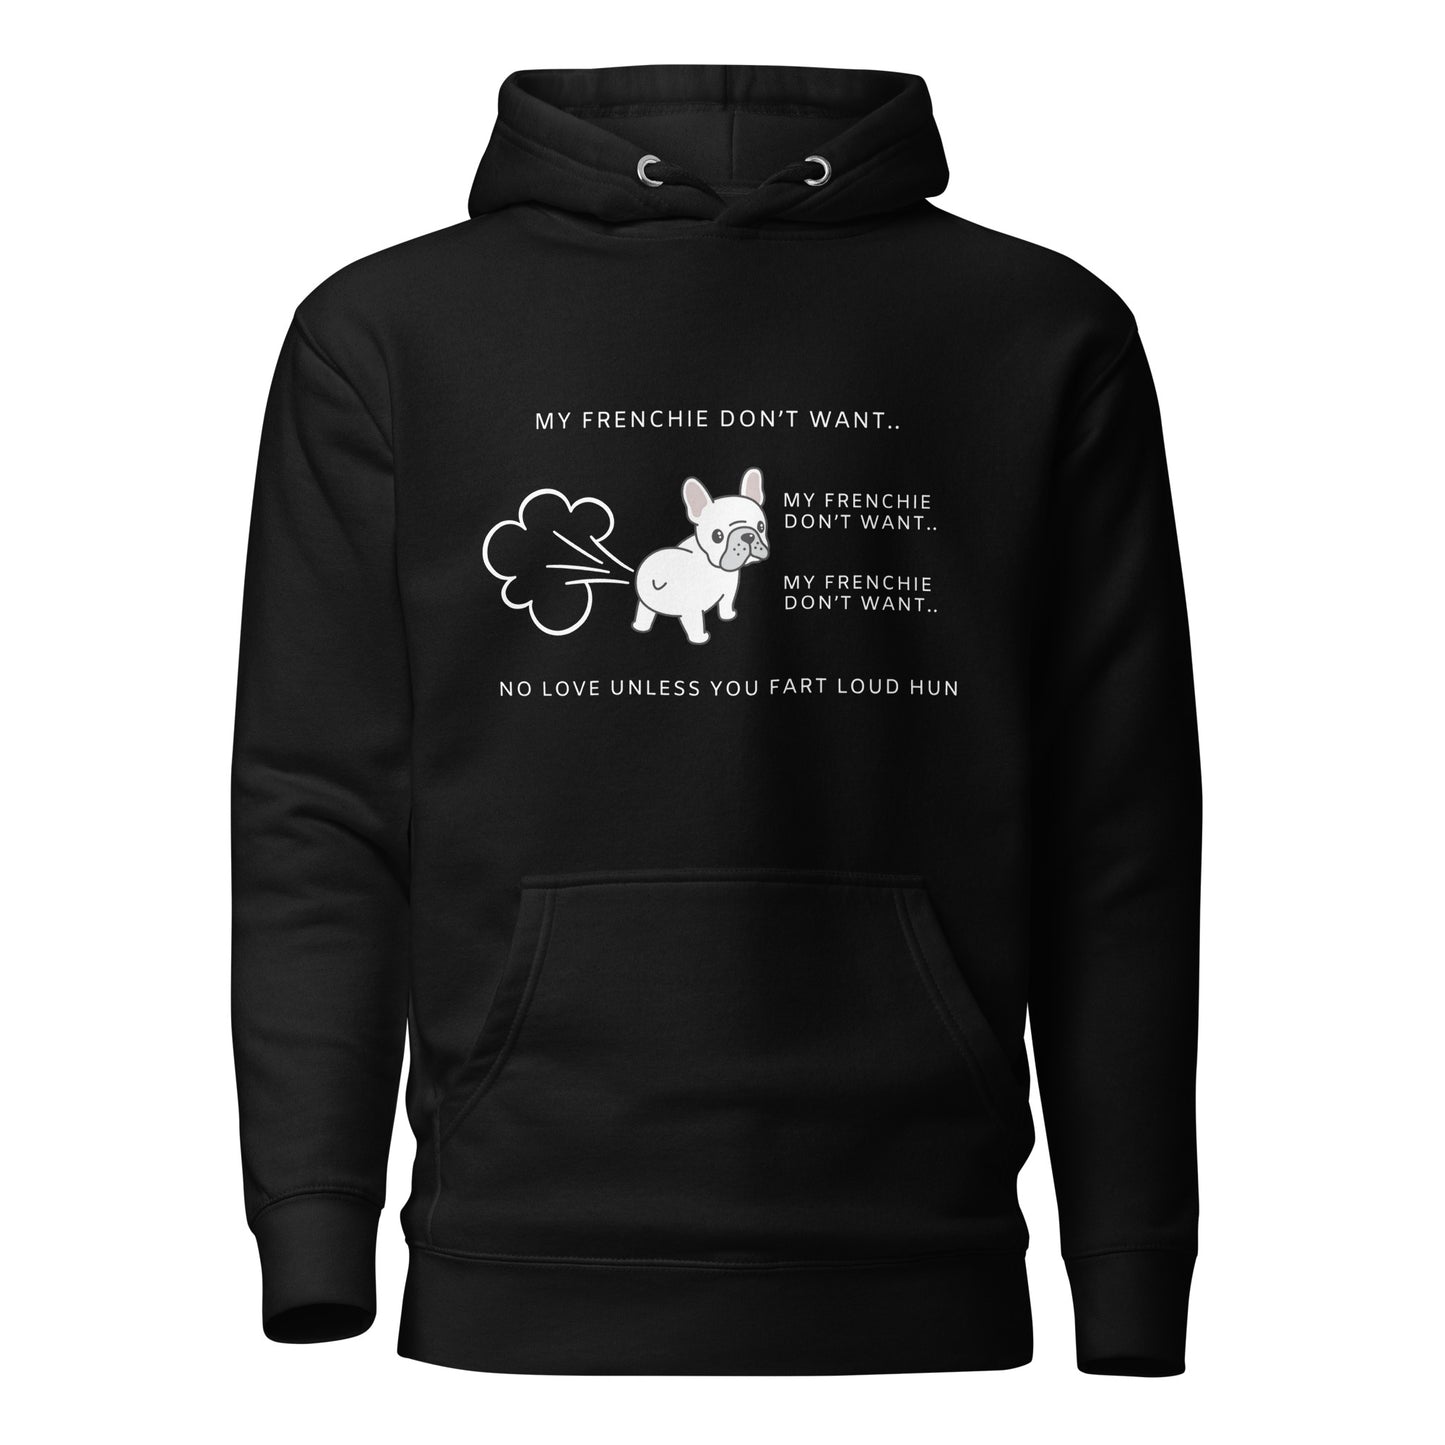 My Frenchie Don't Want Unisex Hoodie